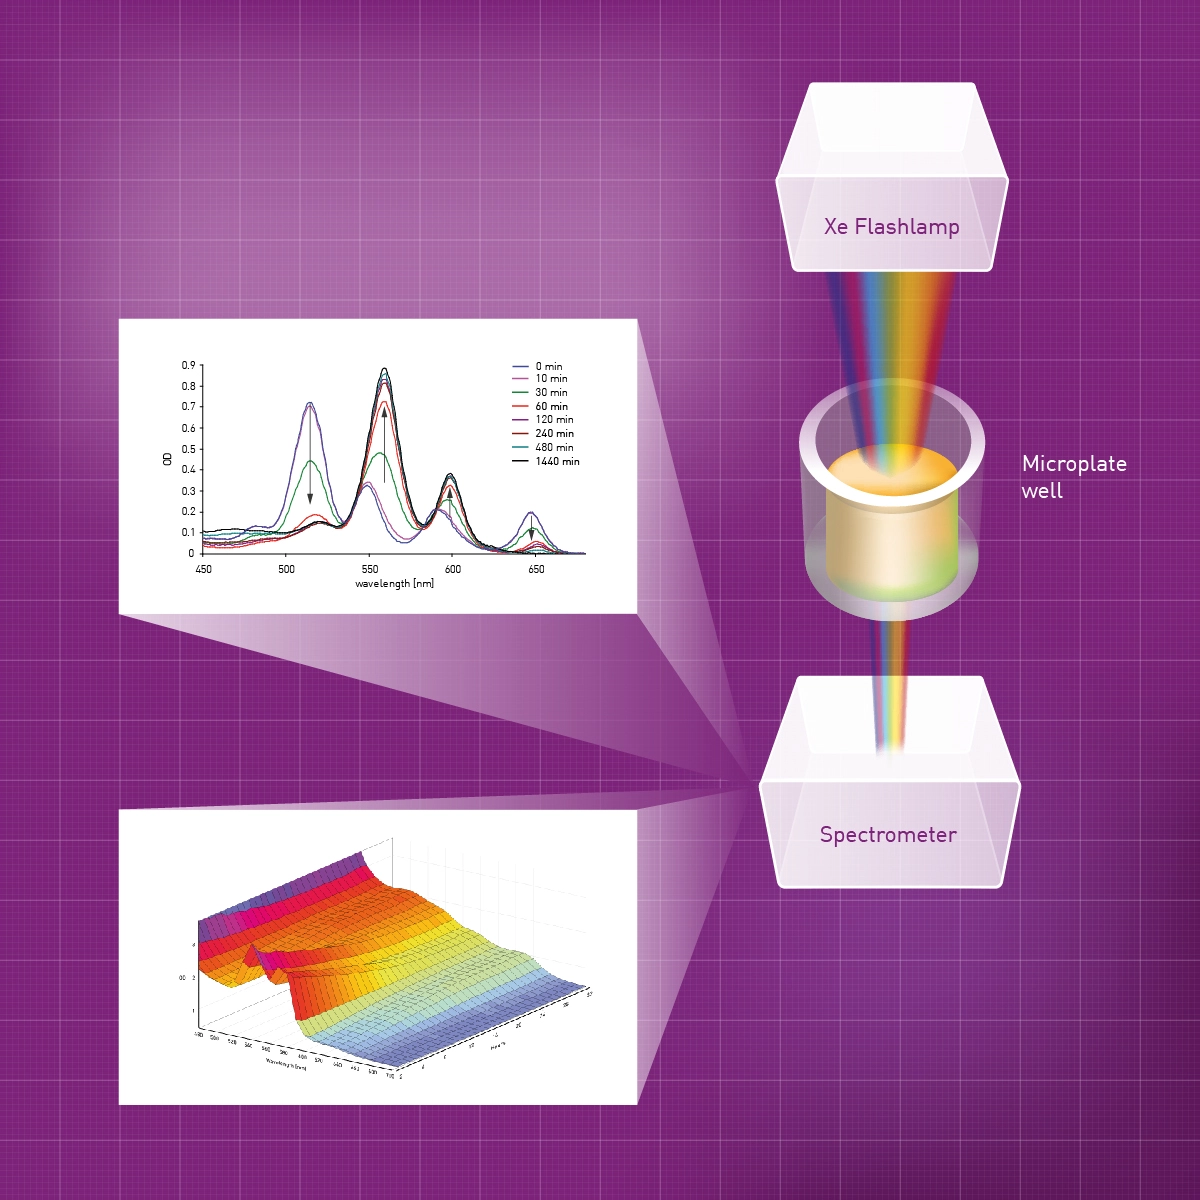 Fig. 1: The UV/vis spectrometer captures the entire UV/vis spectrum of a sample in less than one second, instead of detecting individual wavelengths sequentially.